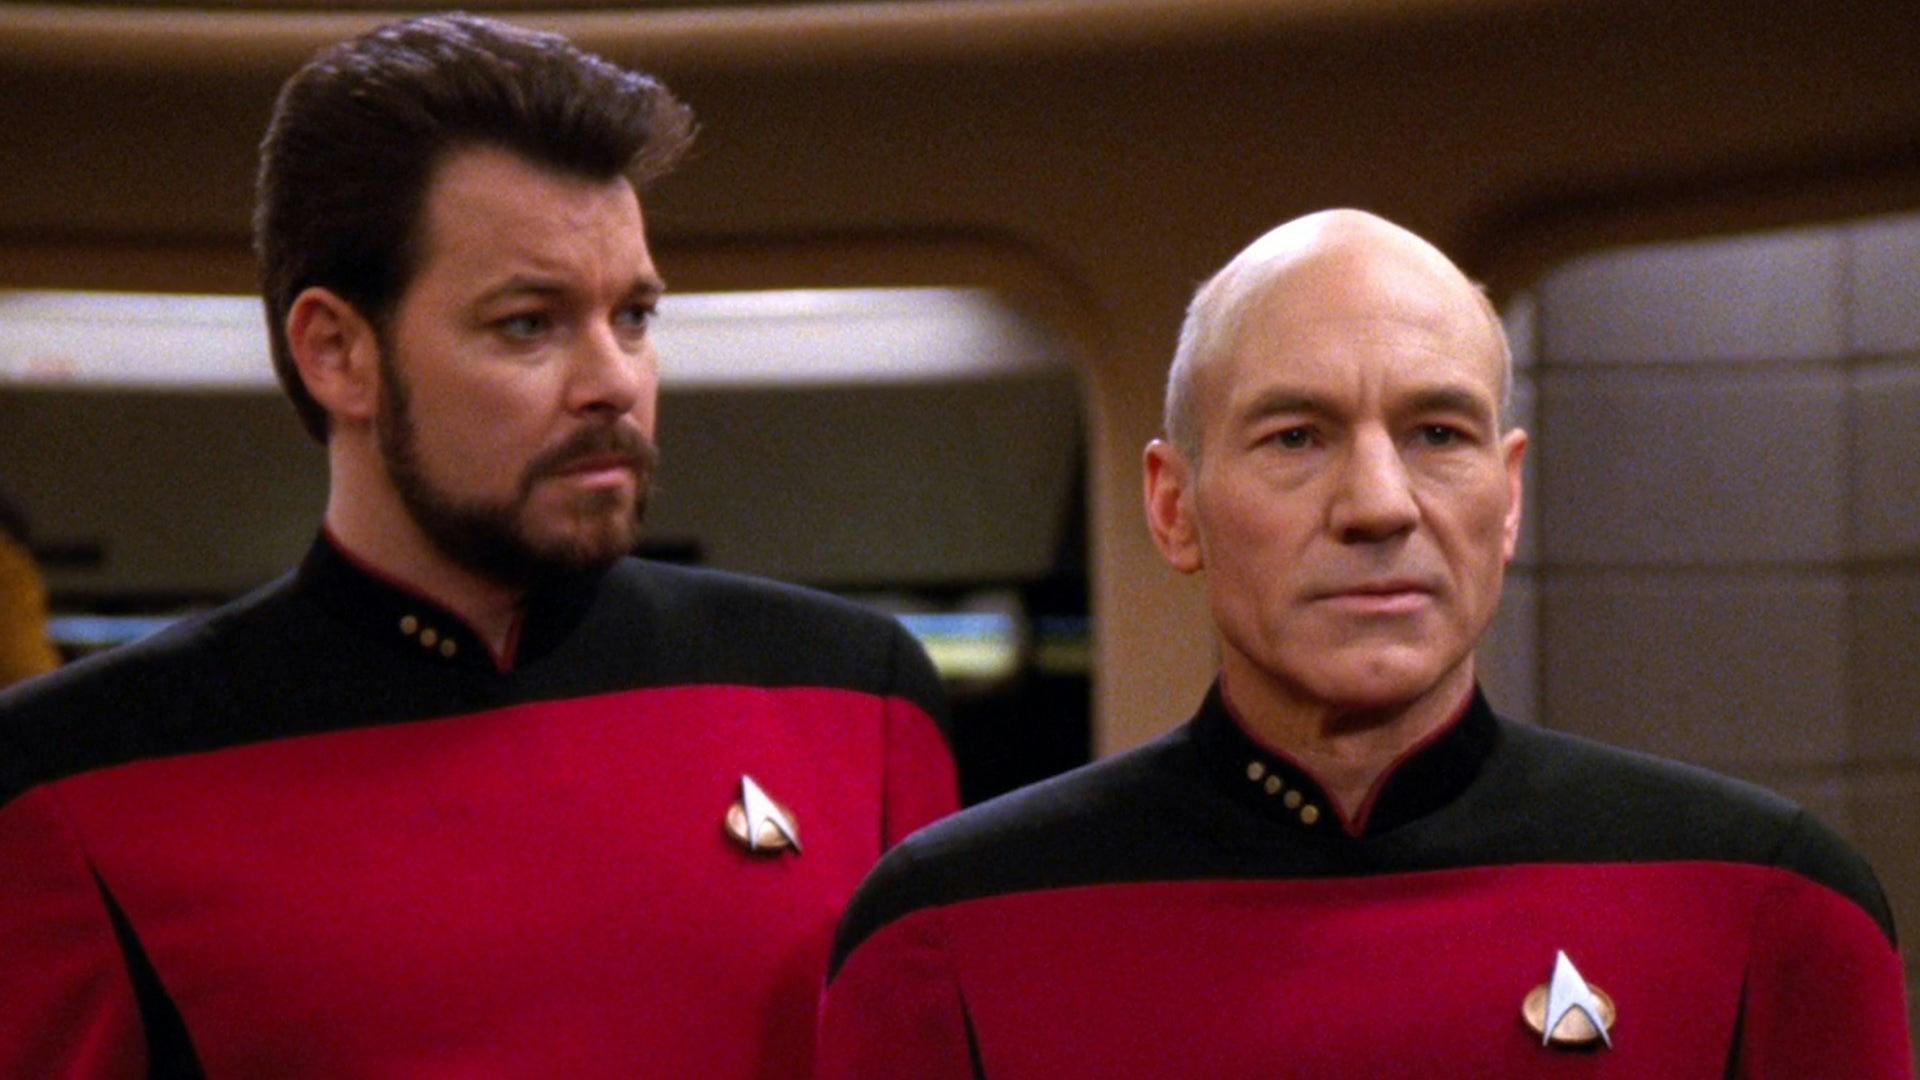 Riker looking at Picard on the bridge with concern, Star Trek: The Next Generation 